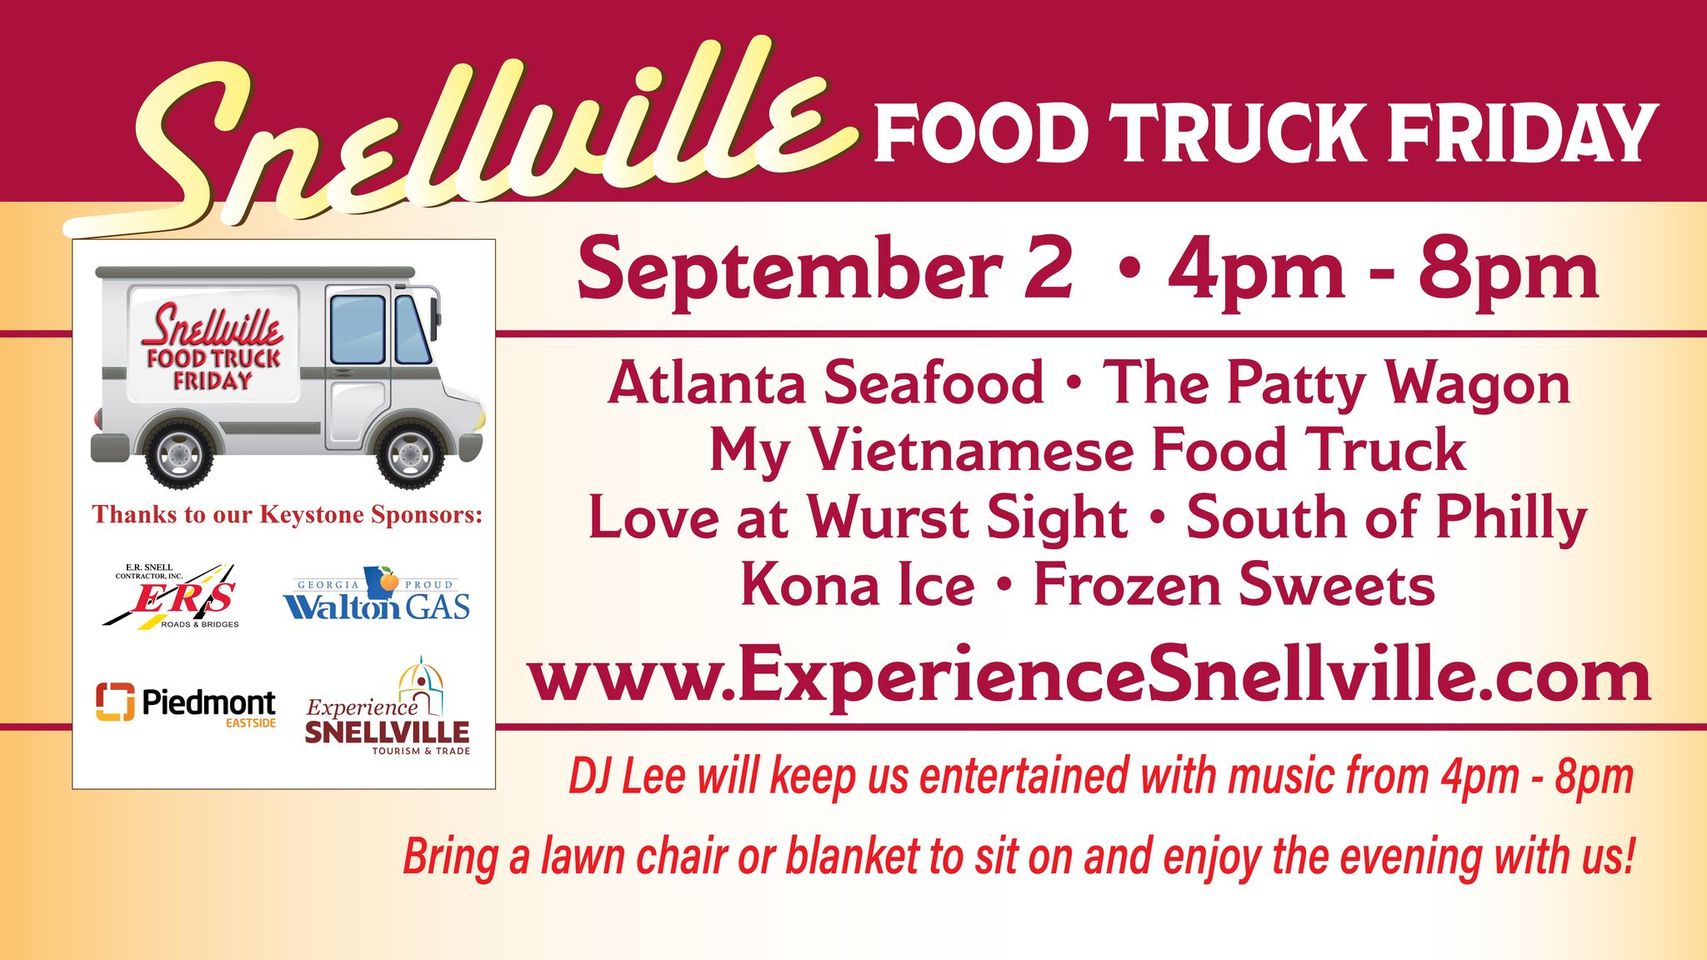 Snellville-Food-Truck-Friday